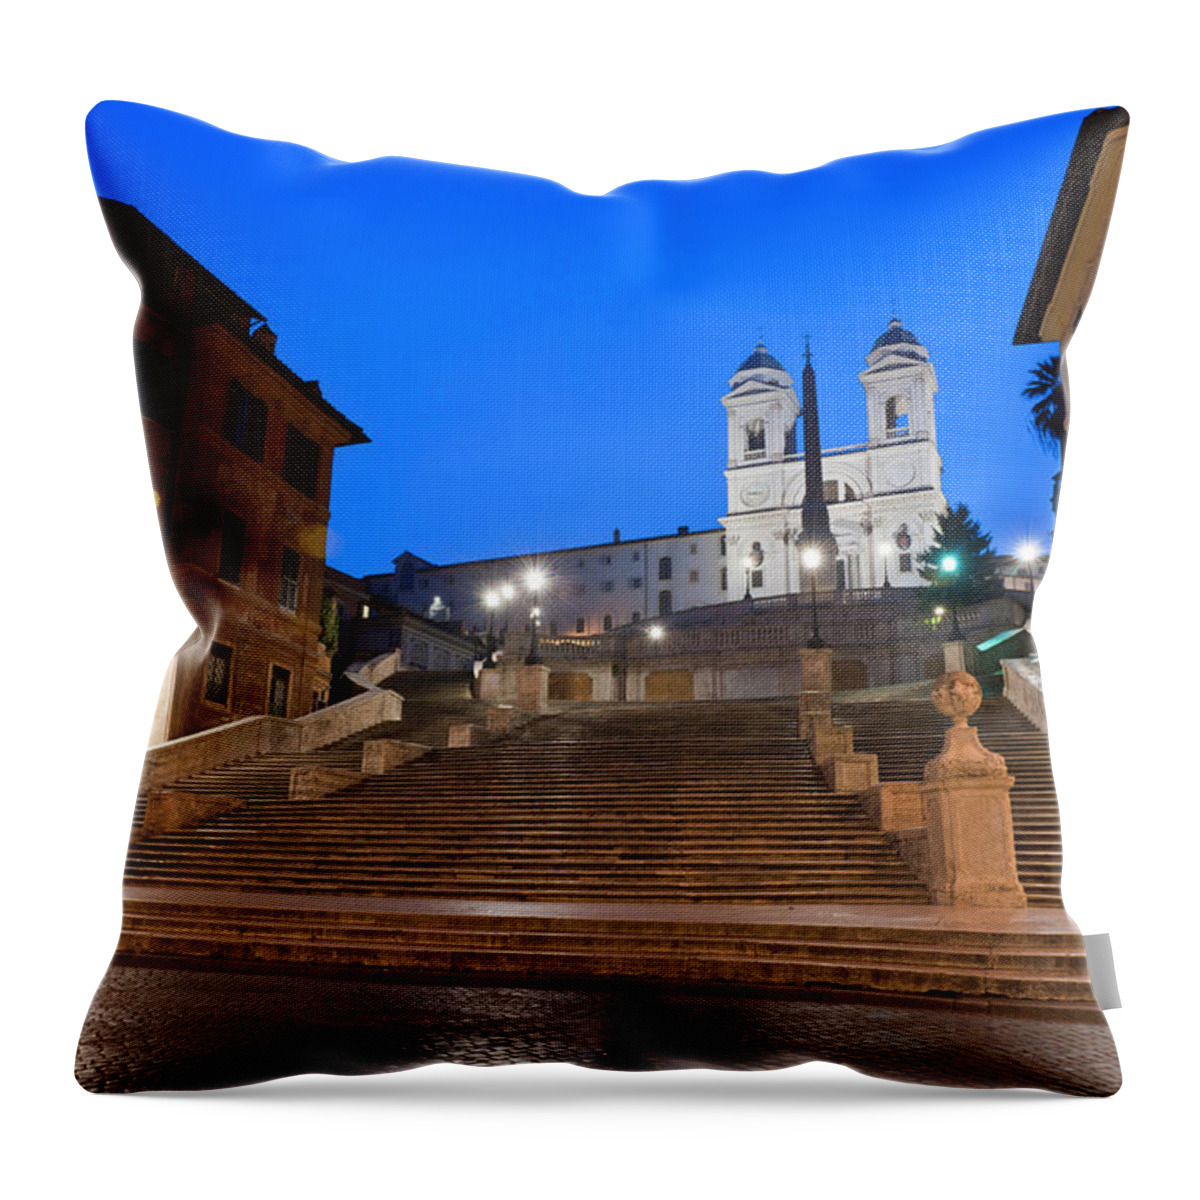 Steps Throw Pillow featuring the photograph Spanish Steps Piazza Di Spagna Rome by Fotovoyager